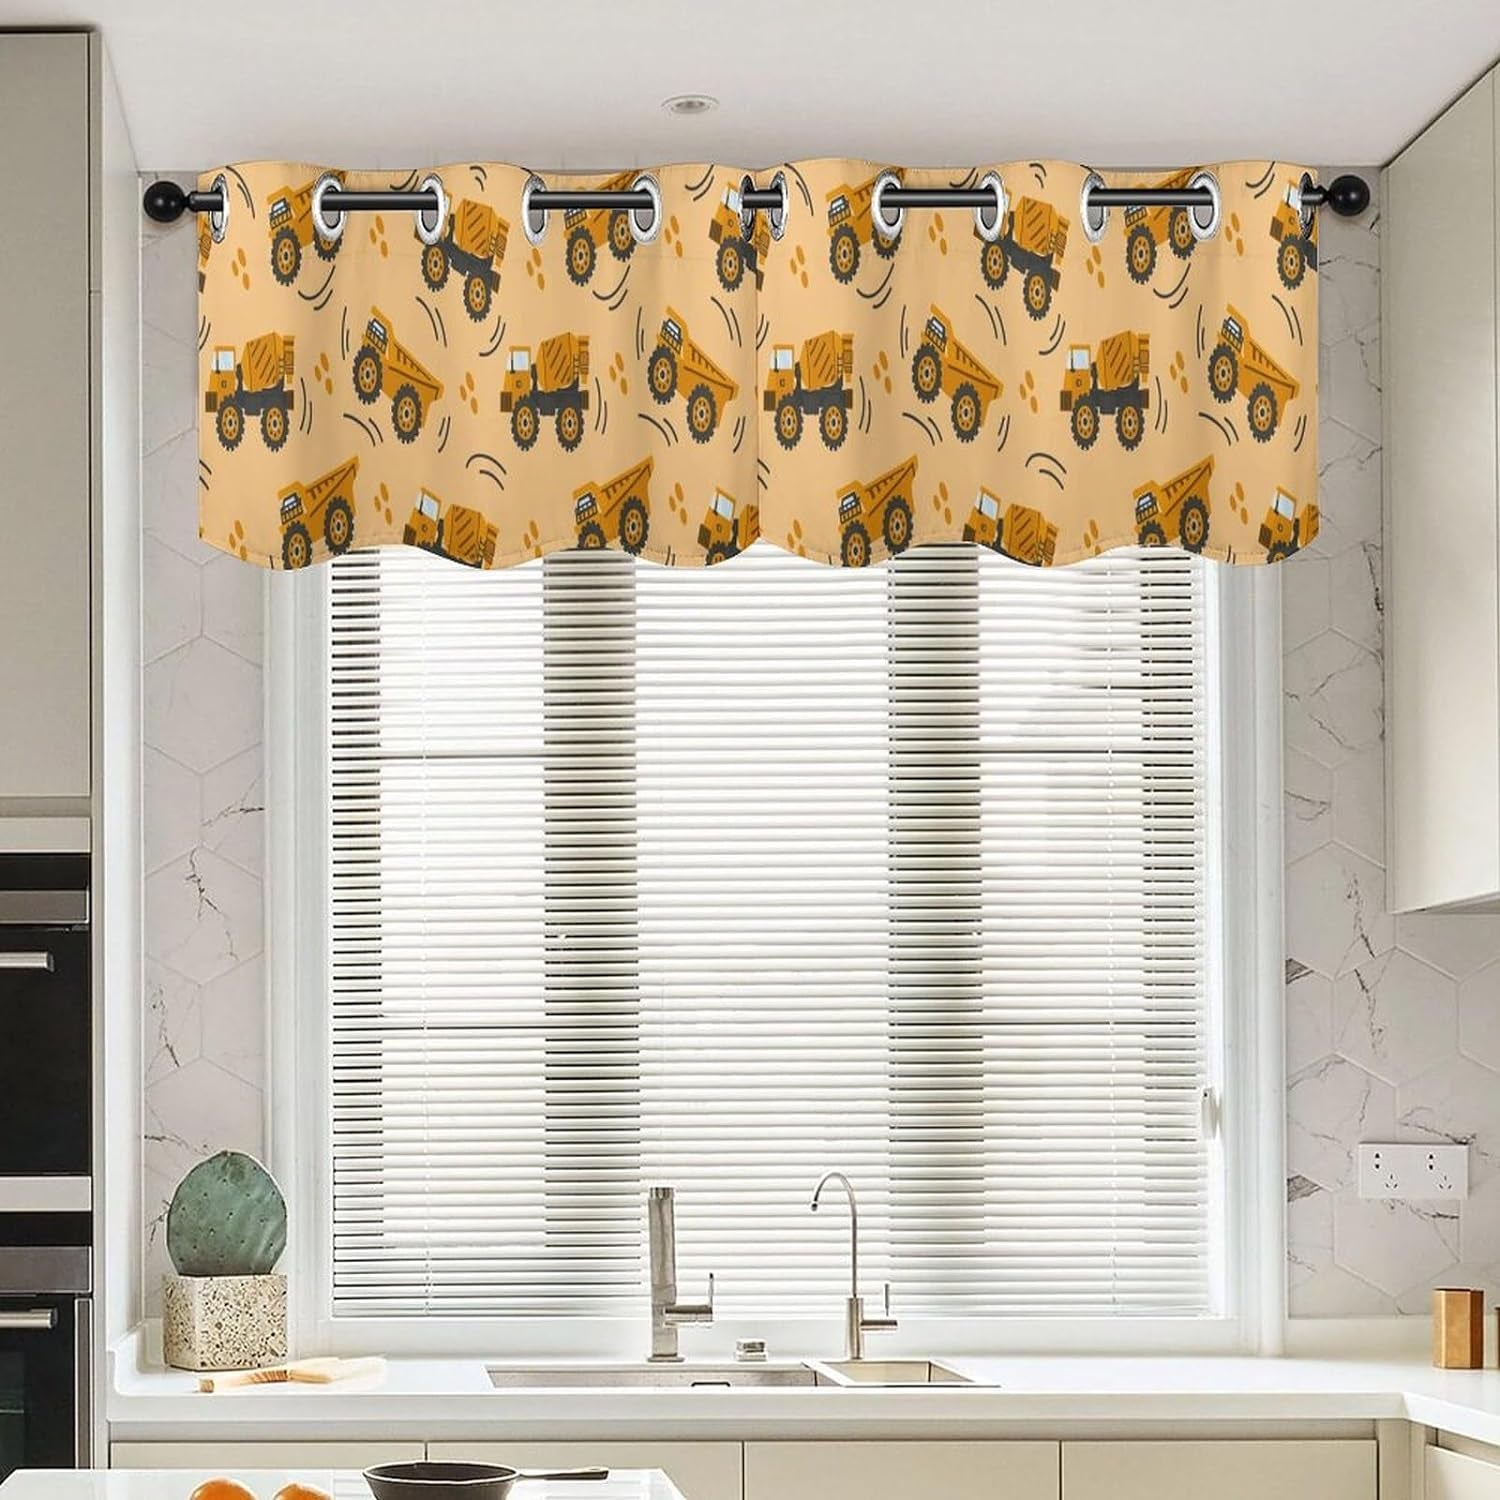 Cartoon Car Window Valances Cute Heavy Equipment Machinery Grommet Blackout Curtain Valance Window Toppers Valances for Home Kitchen Living Room Decor 52X16 Inches 2 Pcs